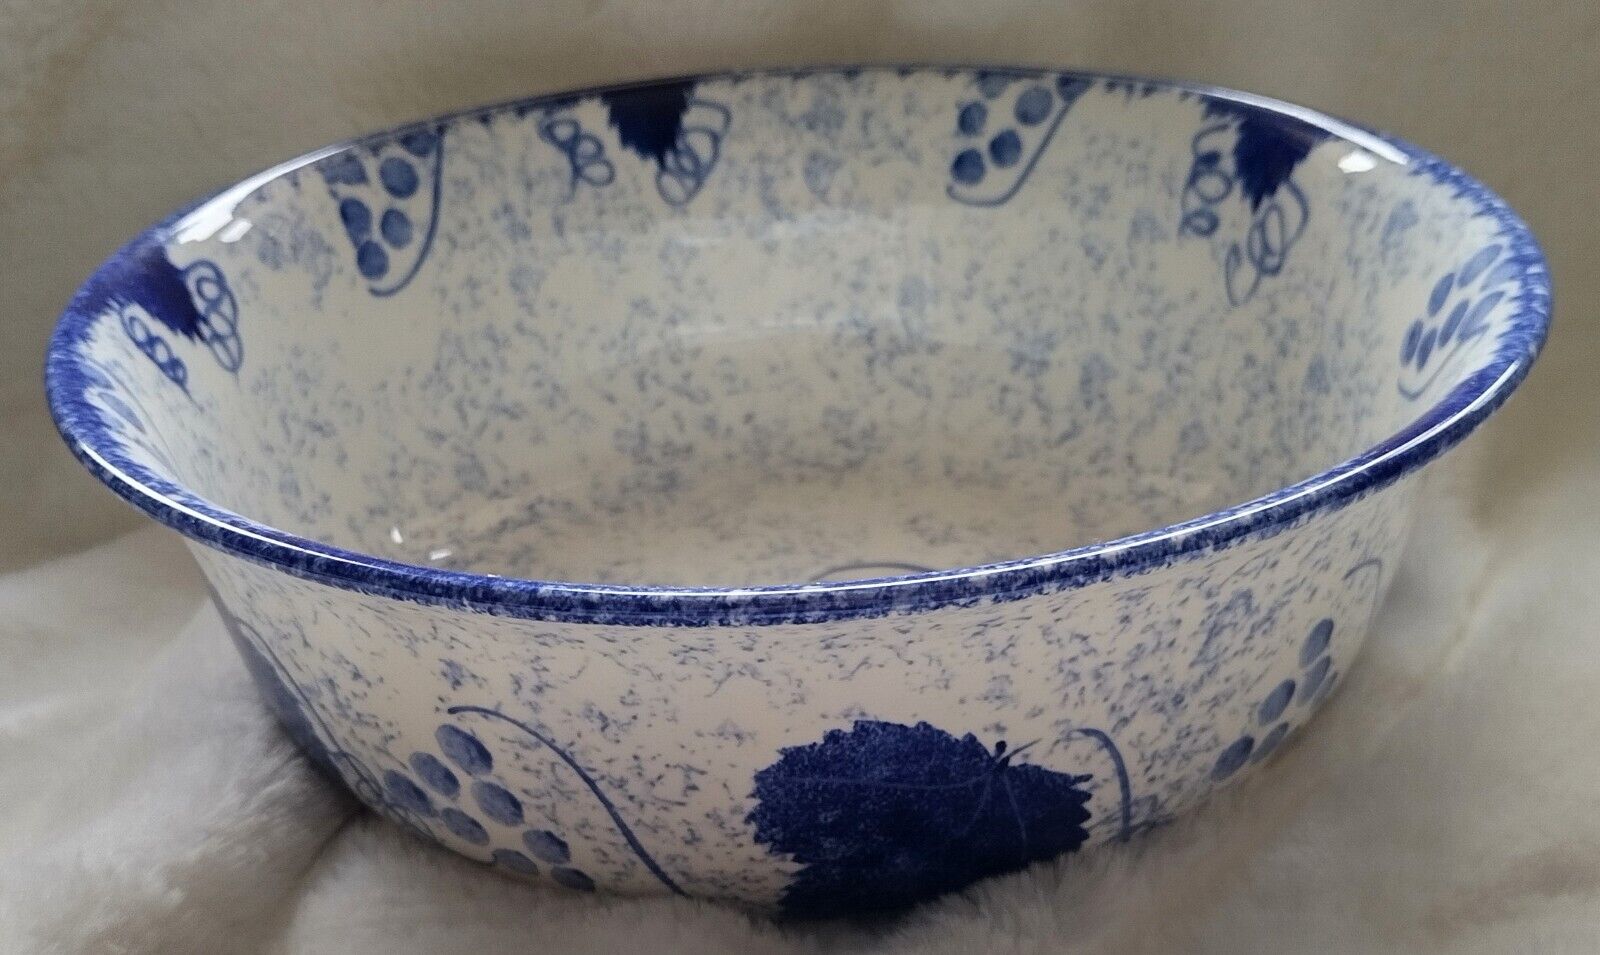 Poole Pottery Blue & White Grapes & Leaves Serving Bowl, Hand Painted, England